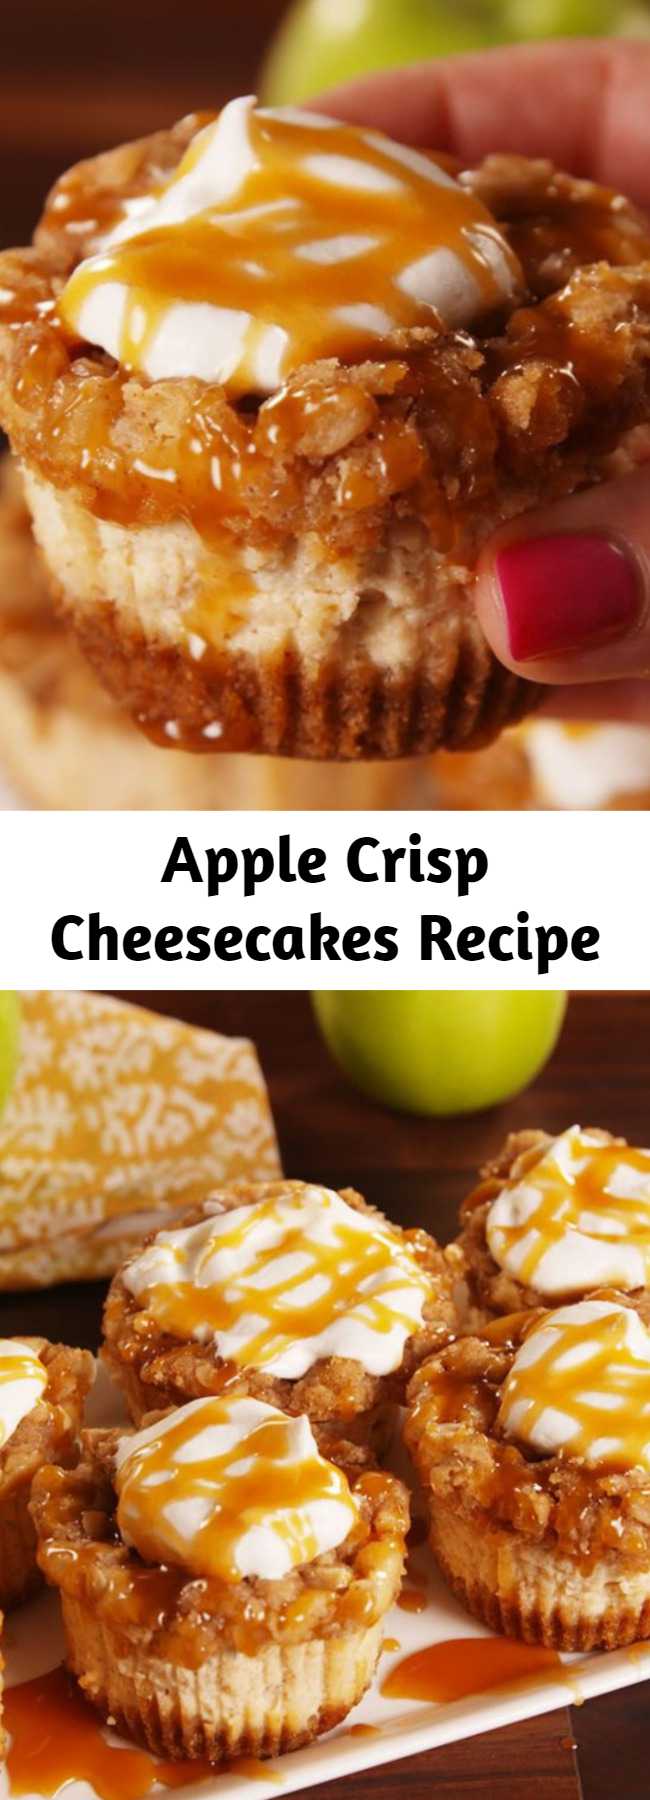 Apple Crisp Cheesecakes Recipe - To have cheesecake faster try these Mini Apple Cheesecakes. You won't be able to eat just one.